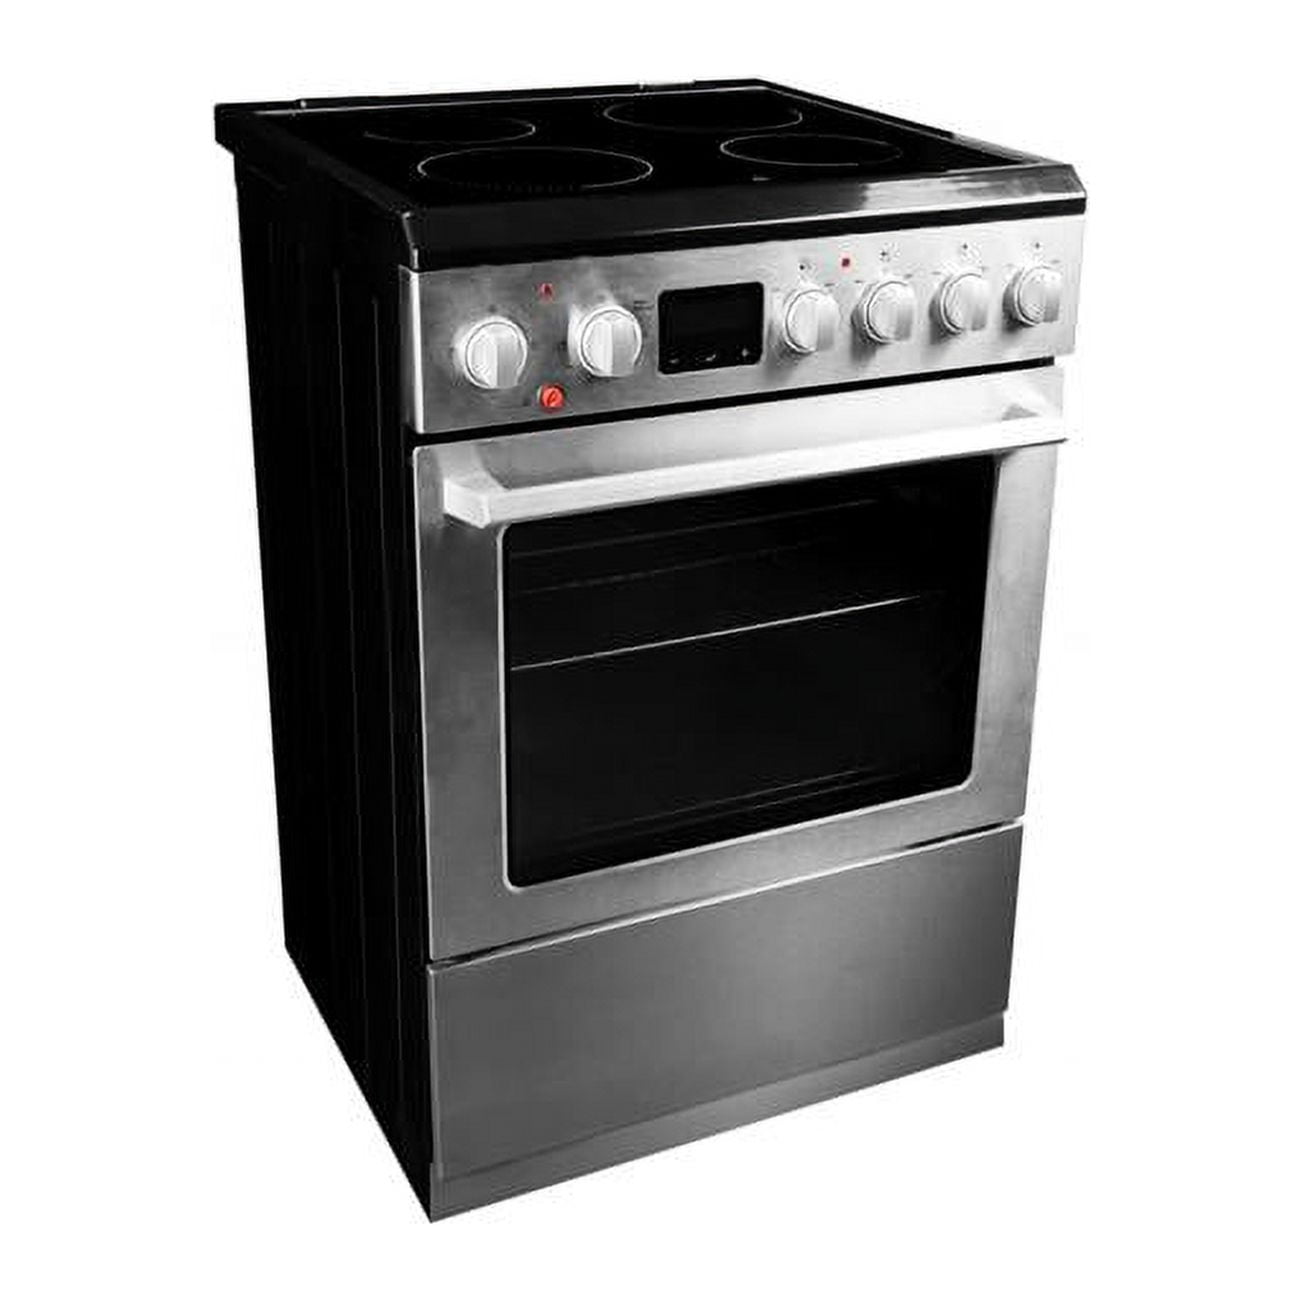 UPC 067638000215 product image for DRCA240BSS 2.5 cu. ft. Slide-in Electric Range Air Fry | upcitemdb.com